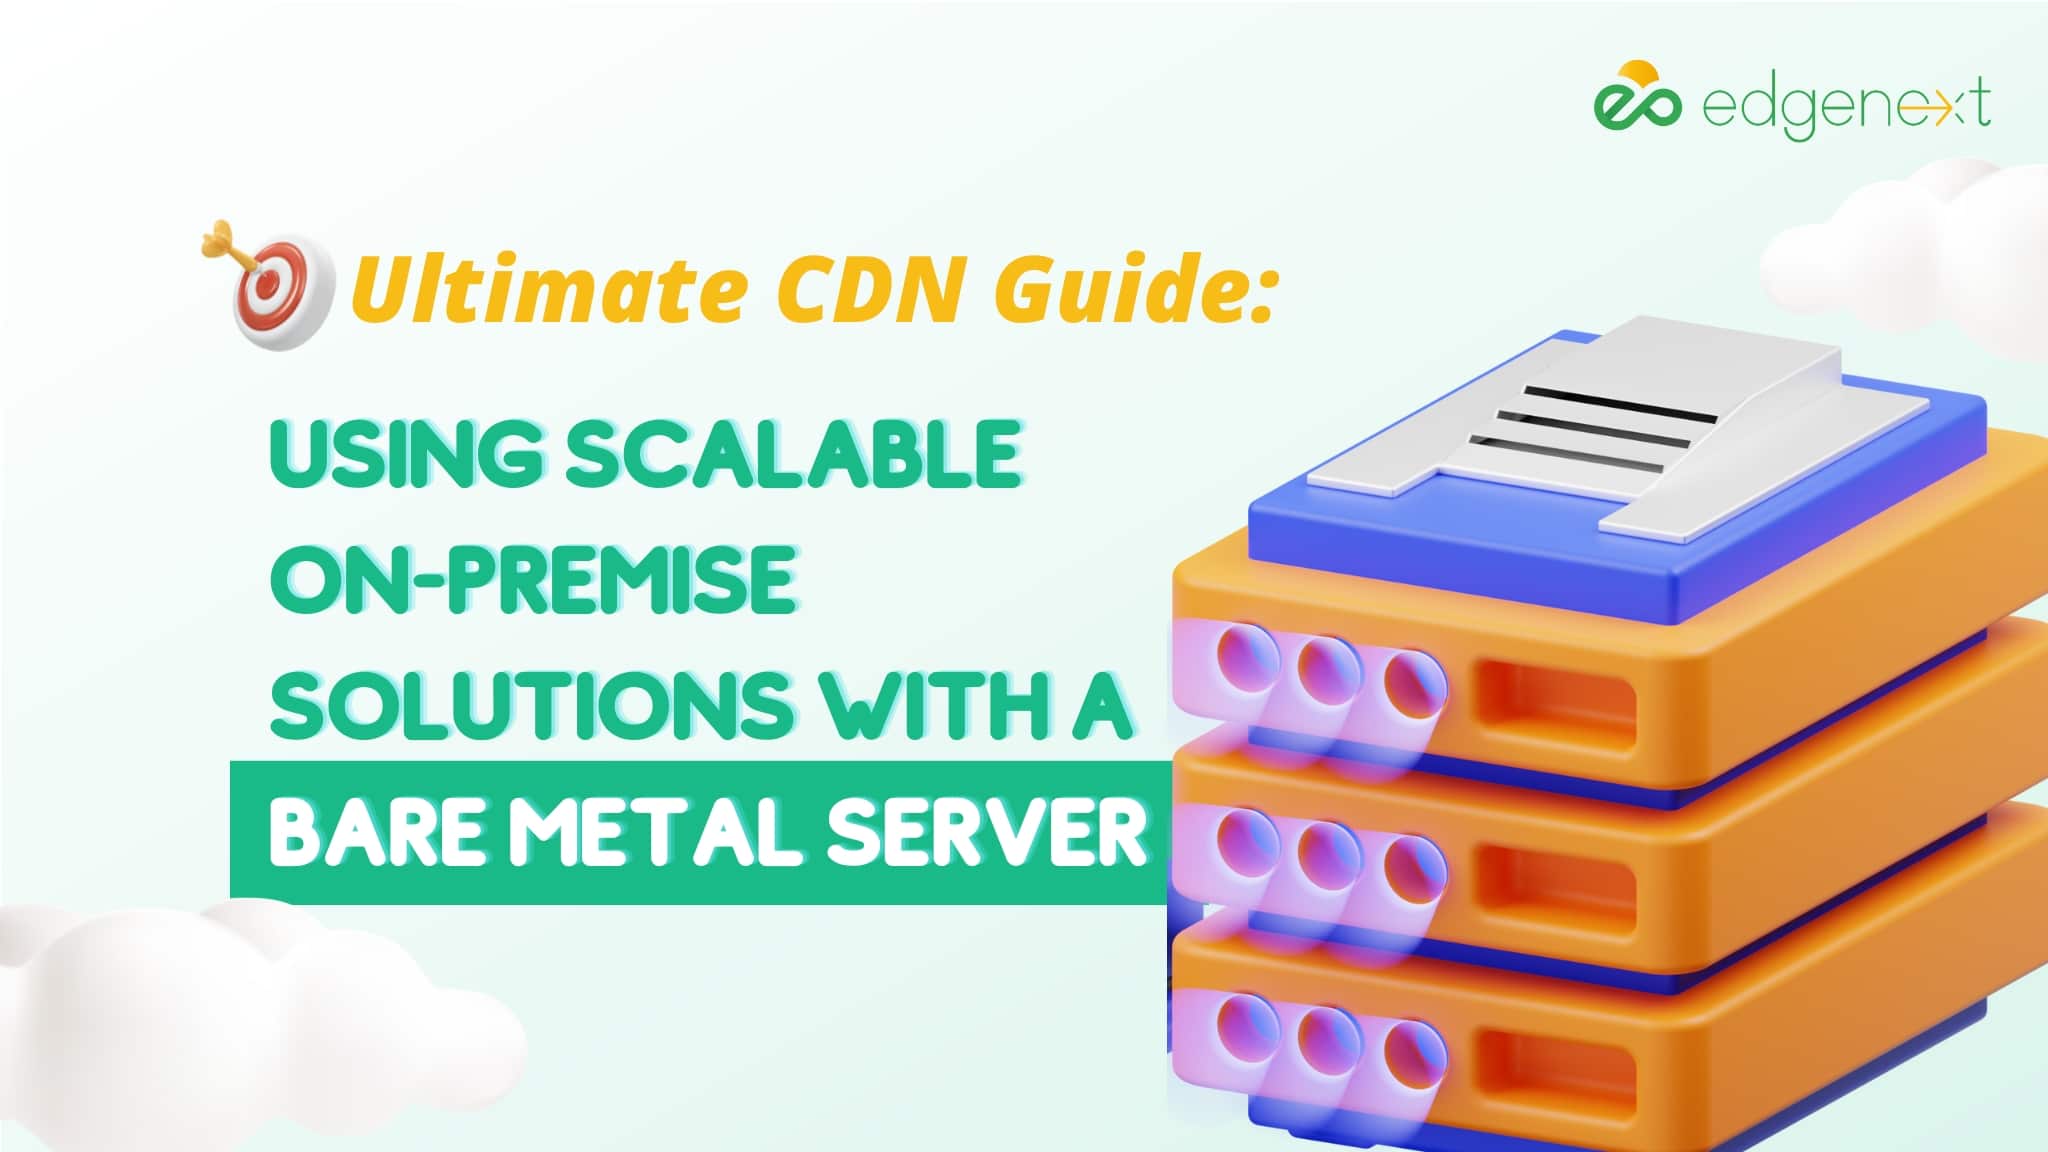 Using Scalable On-Premise Solutions with a Bare Metal Server